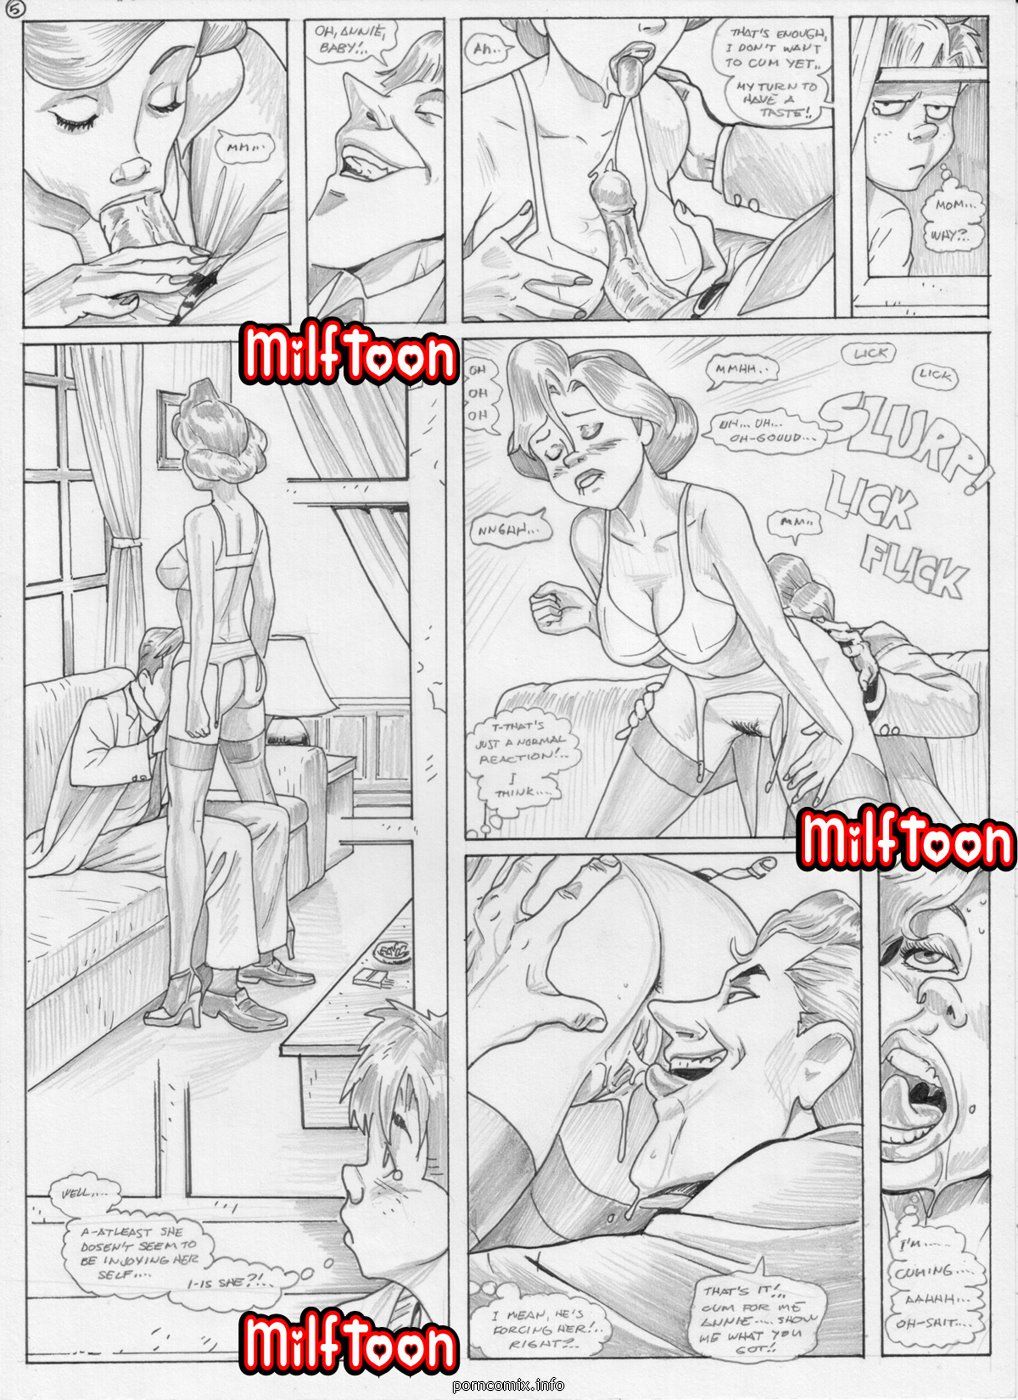 Milftoon - Iron Giant 2, Incest page 6